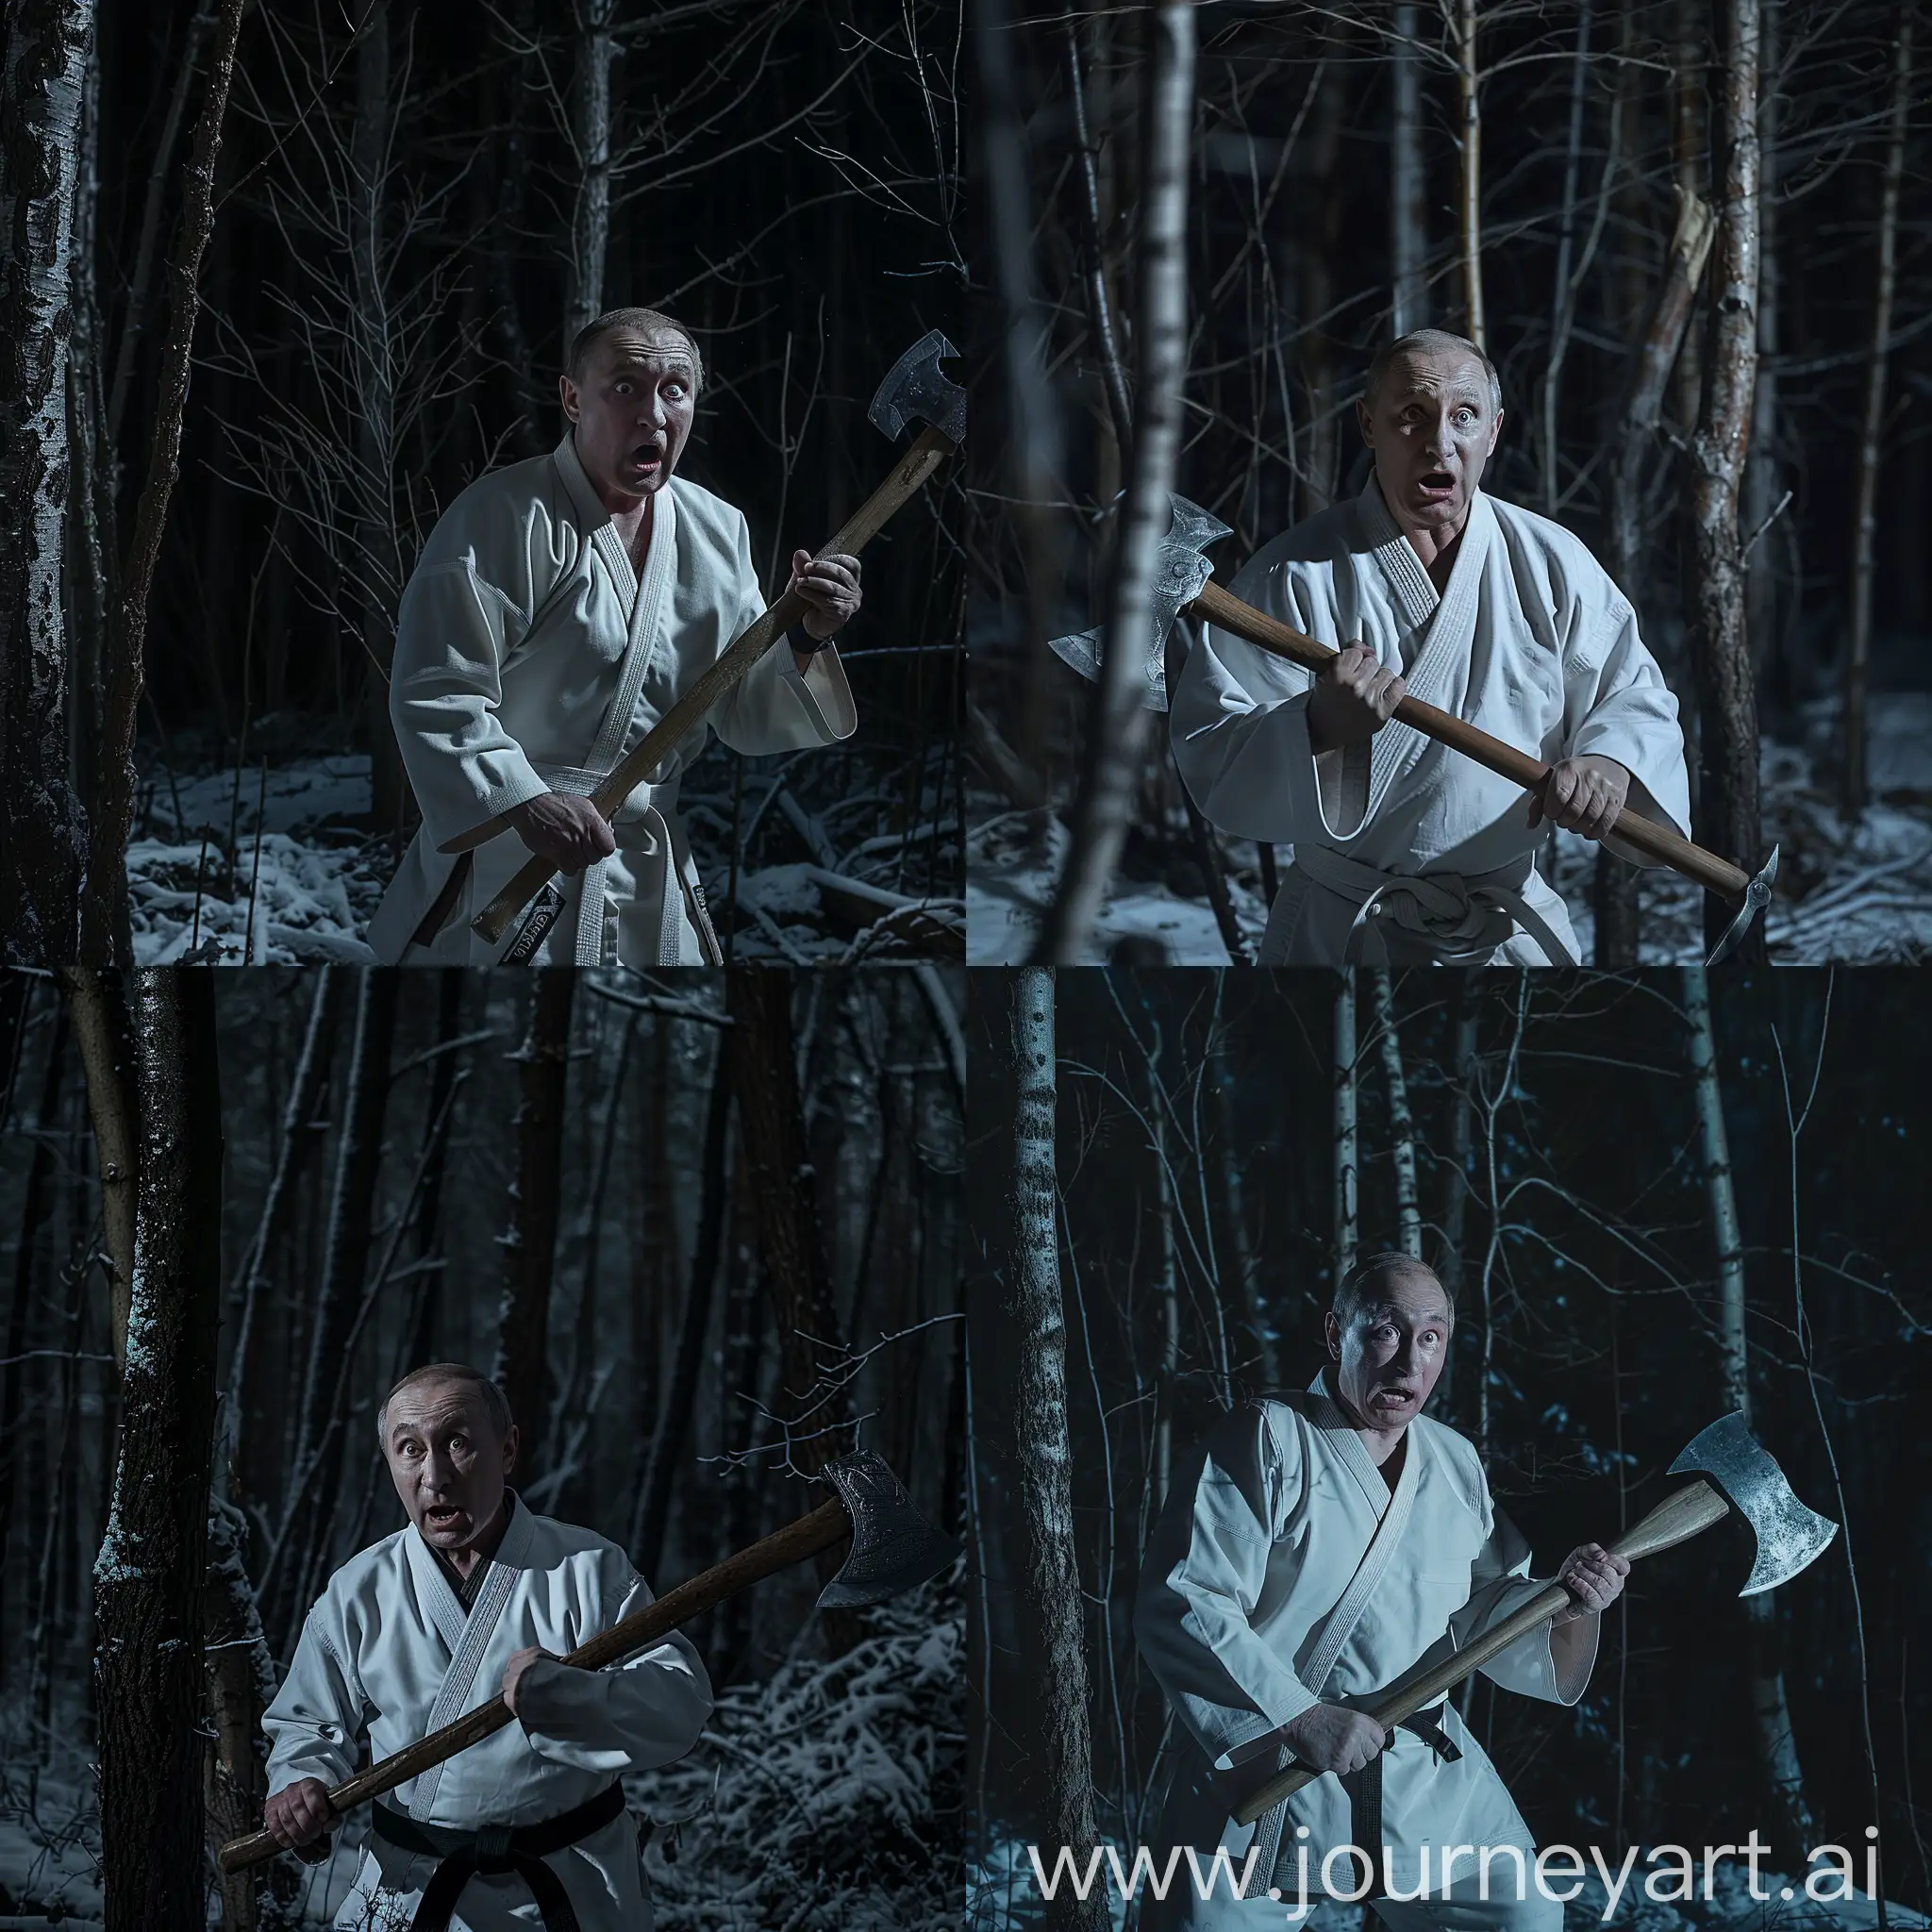 Putin, standing, dark eerie forest, night, traditional white martial arts gi, shocked wide-eyed expression, holding large axe, dense leafless trees, ground covered in snow, dramatic lighting, deep shadows, mysterious, unsettling mood, middle shot, realistic